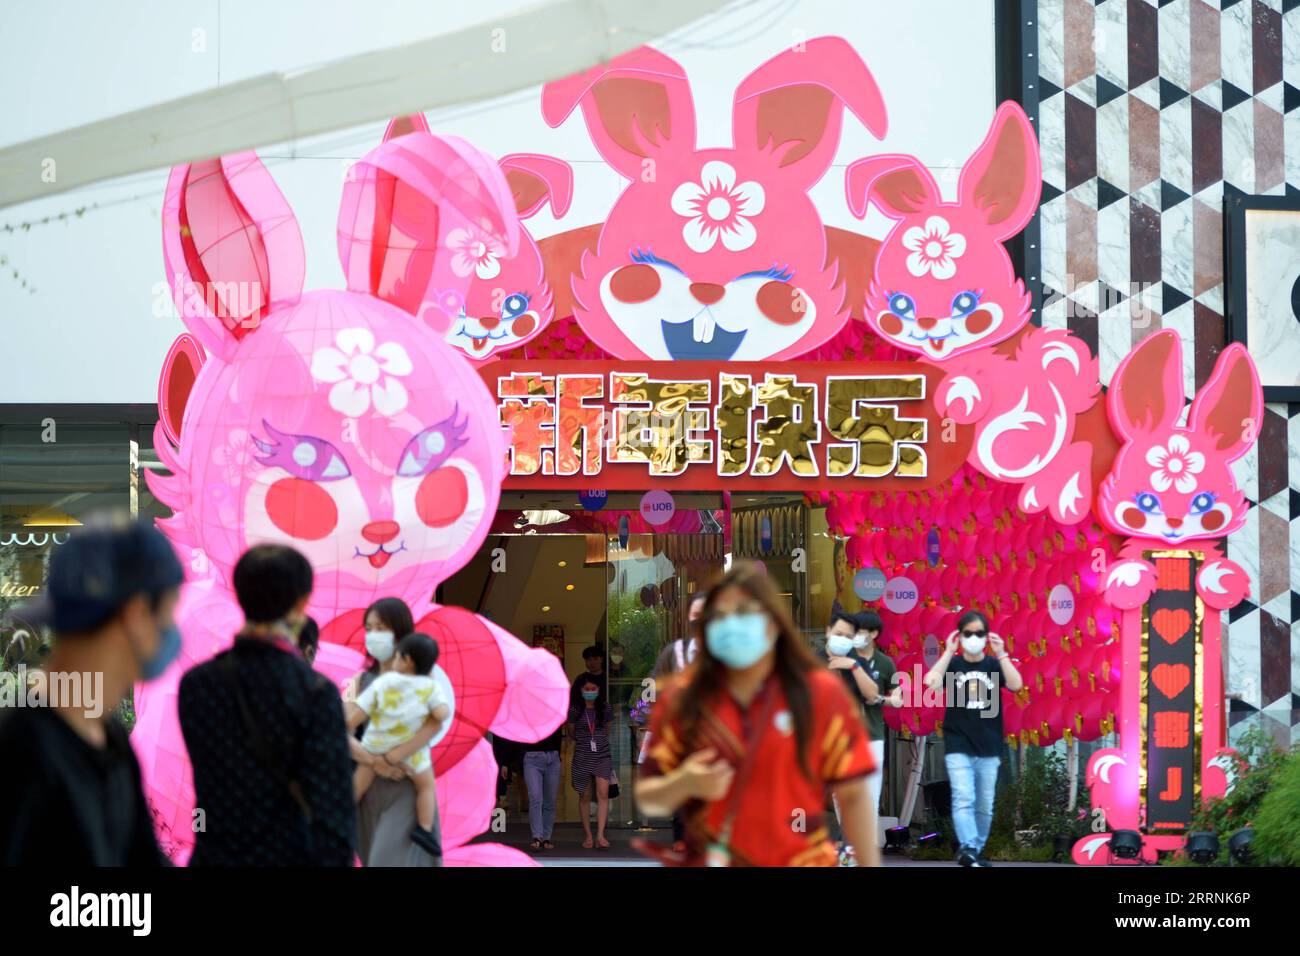 230118 -- BANGKOK, Jan. 18, 2023 -- Decorations for the upcoming Lunar New Year are seen in front of a shopping mall in Bangkok, Thailand on Jan. 18, 2023. Rachen Sageamsak THAILAND-BANGKOK-LUNAR NEW YEAR-DECORATIONS LaxHeng PUBLICATIONxNOTxINxCHN Stock Photo